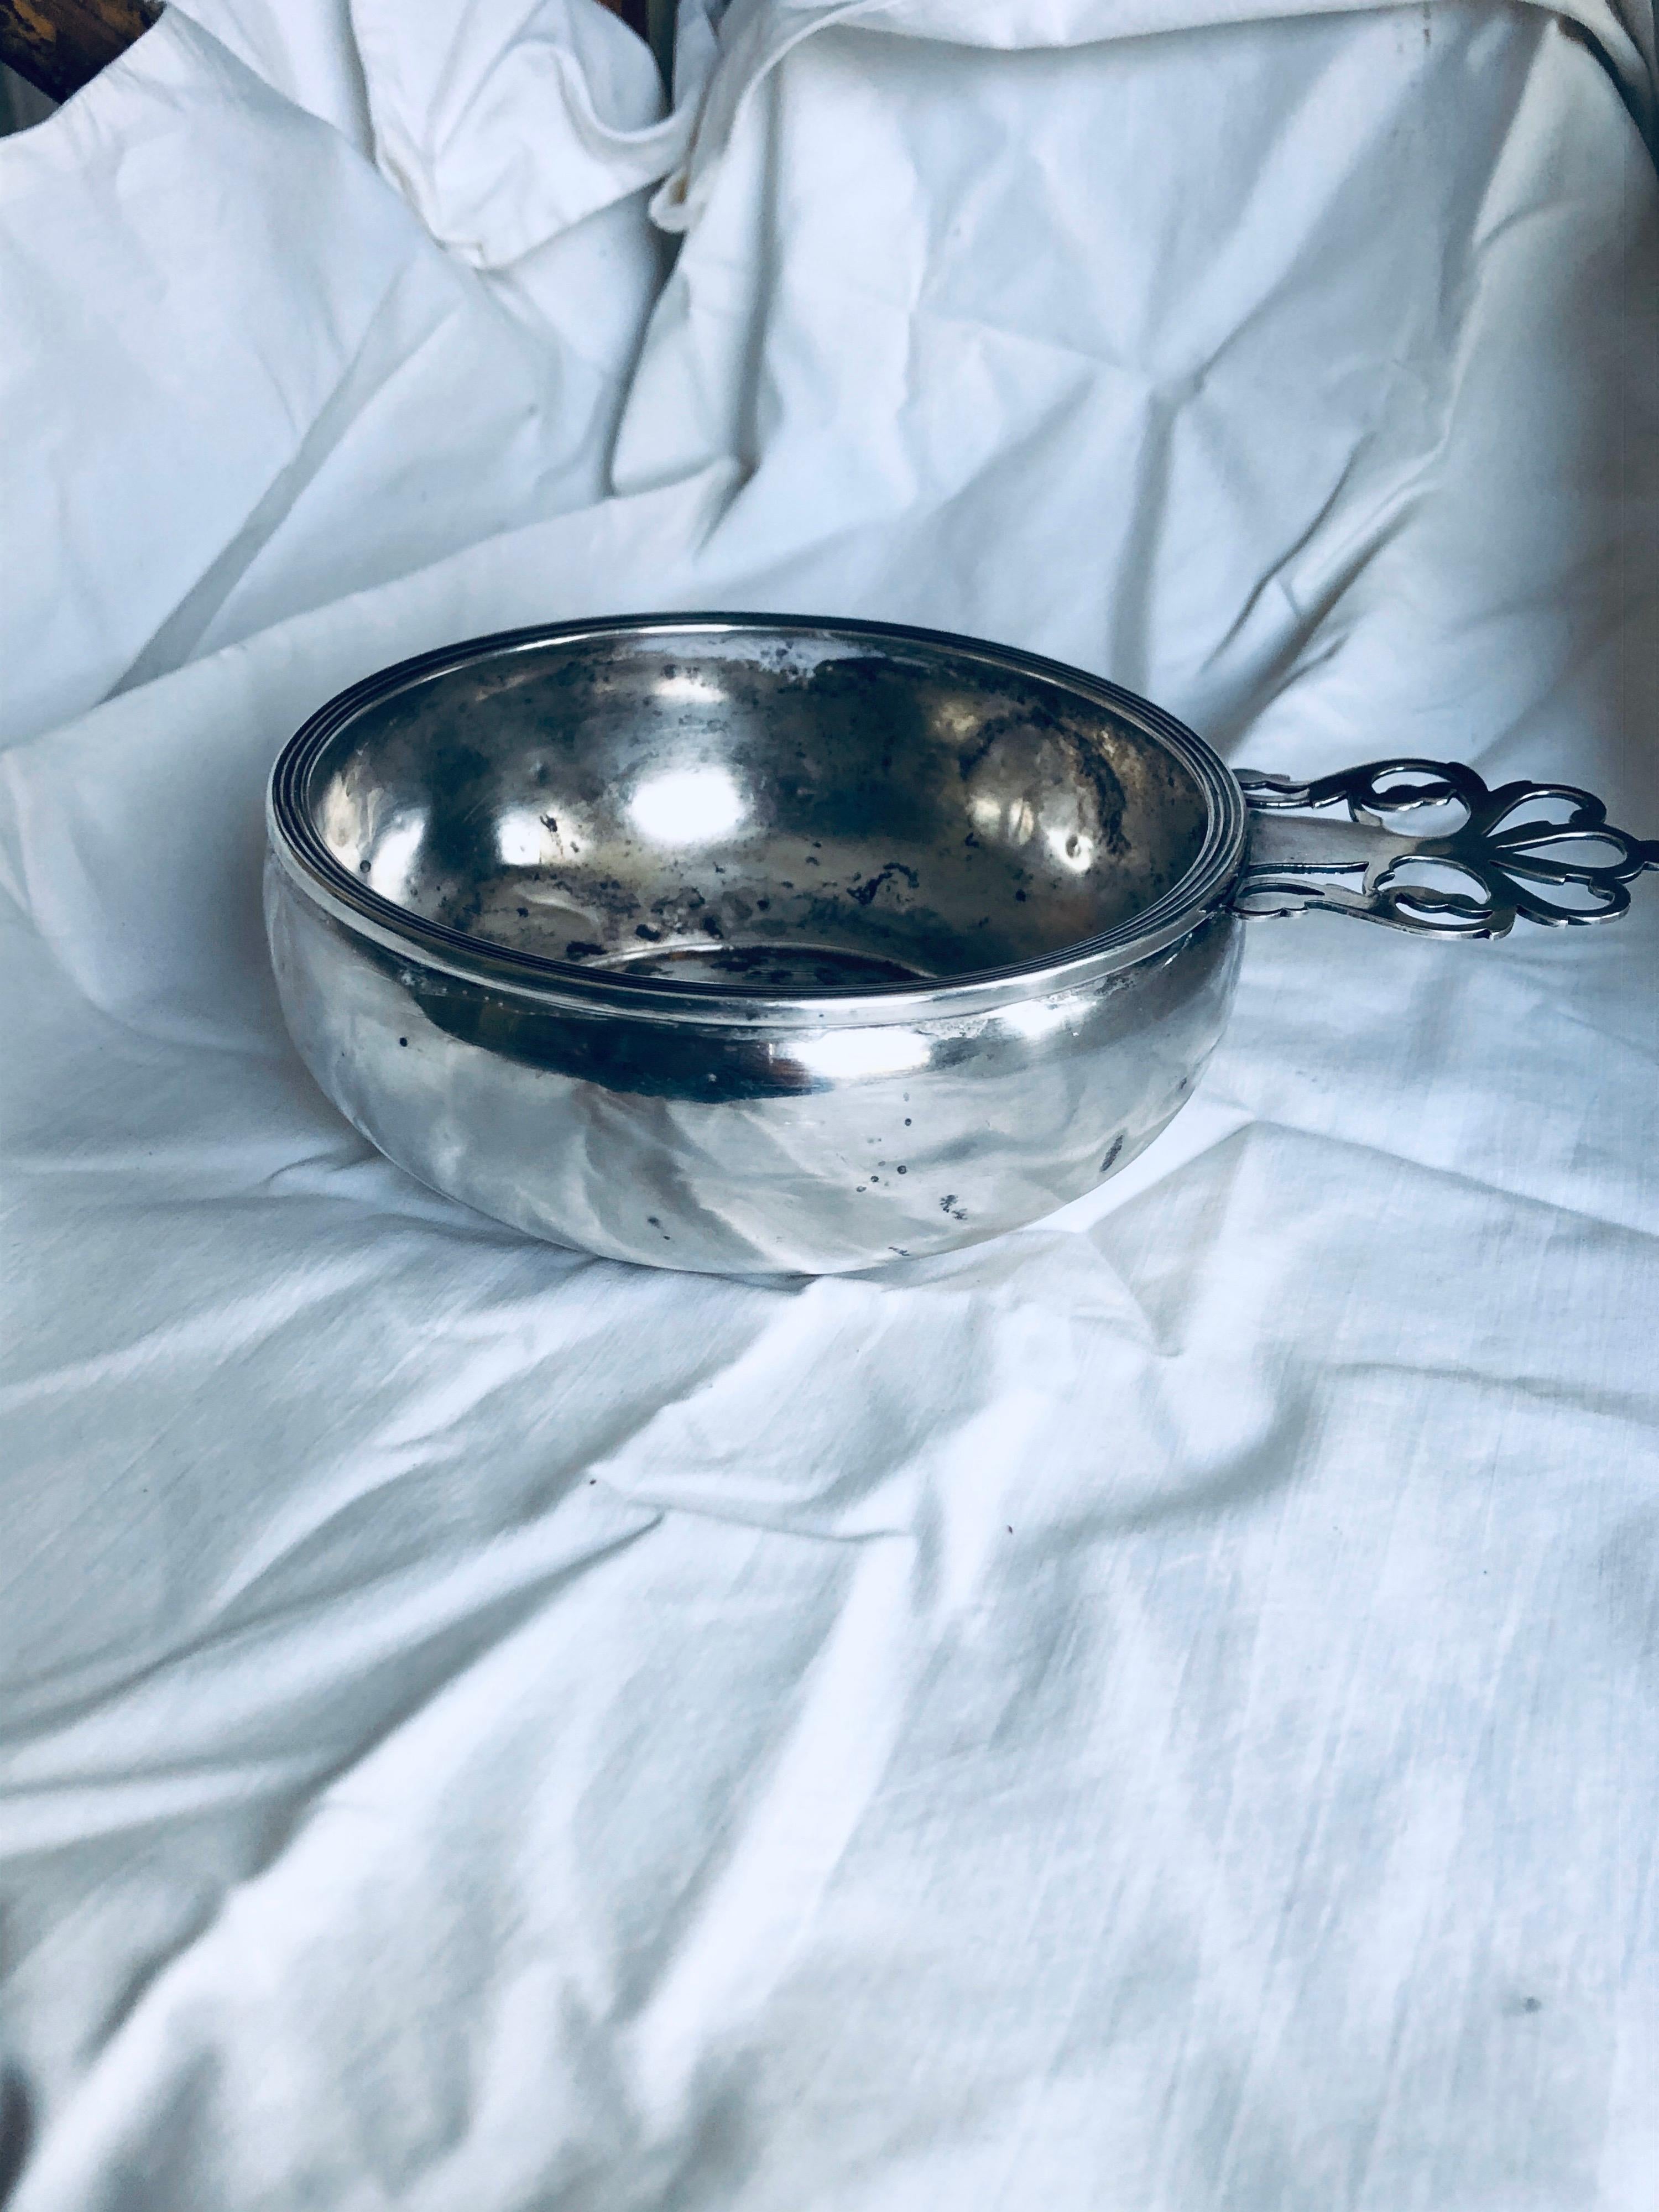 Sterling silver porridger with pierced handle, circa 1950. Ellmore Silver Company. This was used as an ashtray, so there are marks on the interior of the bowl. Monogrammed 